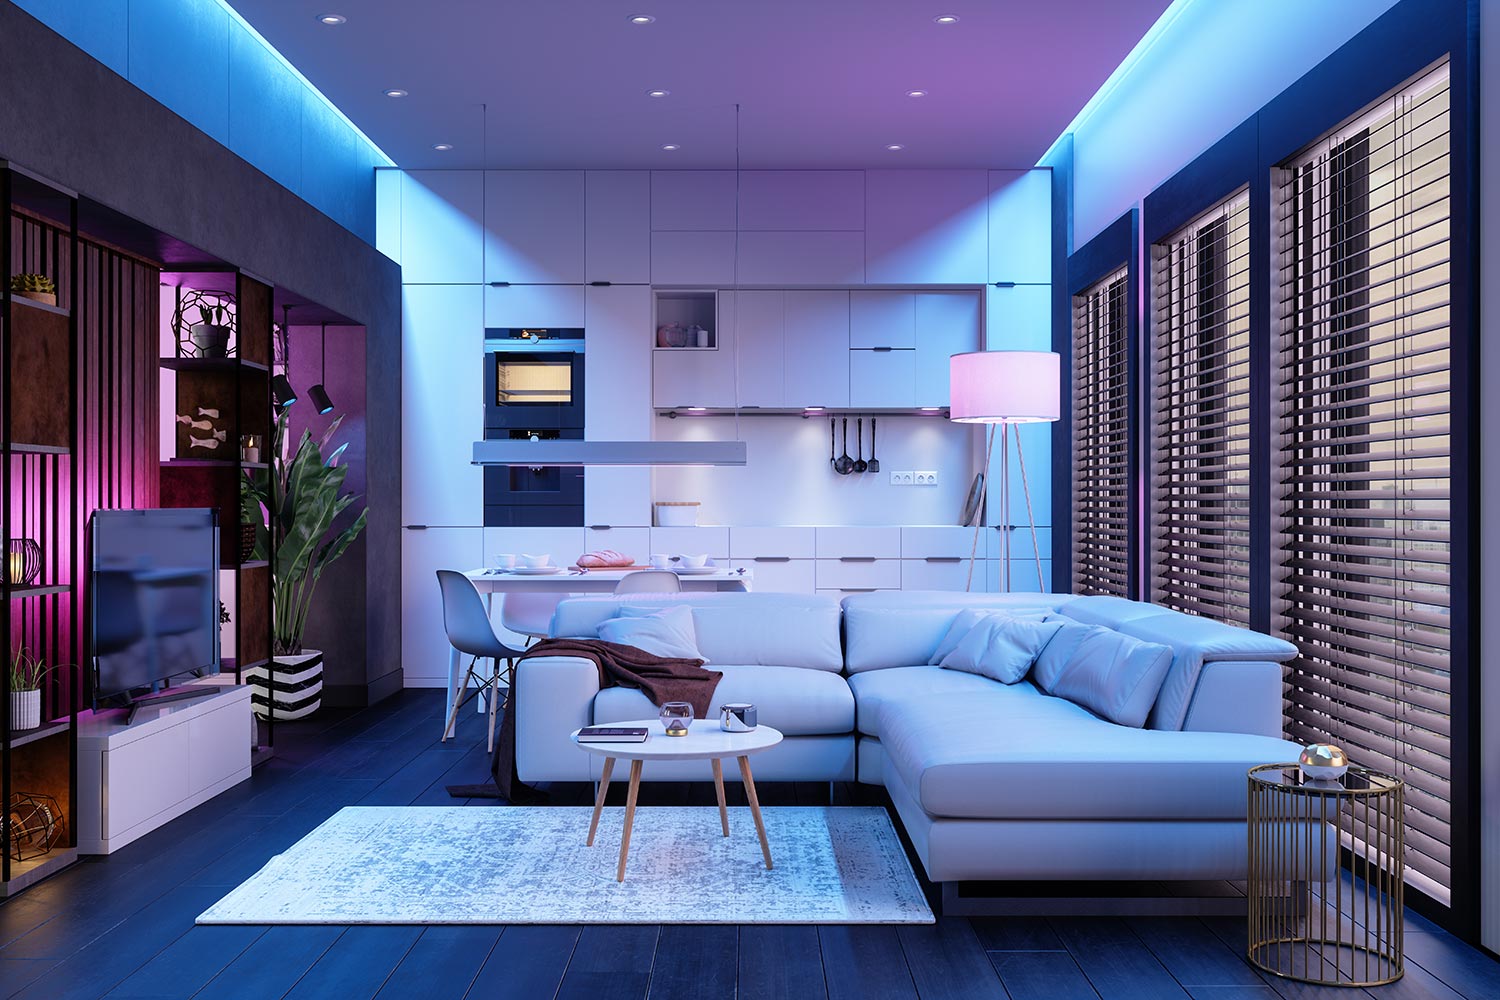 Modern living room and open plan kitchen at night with neon lights